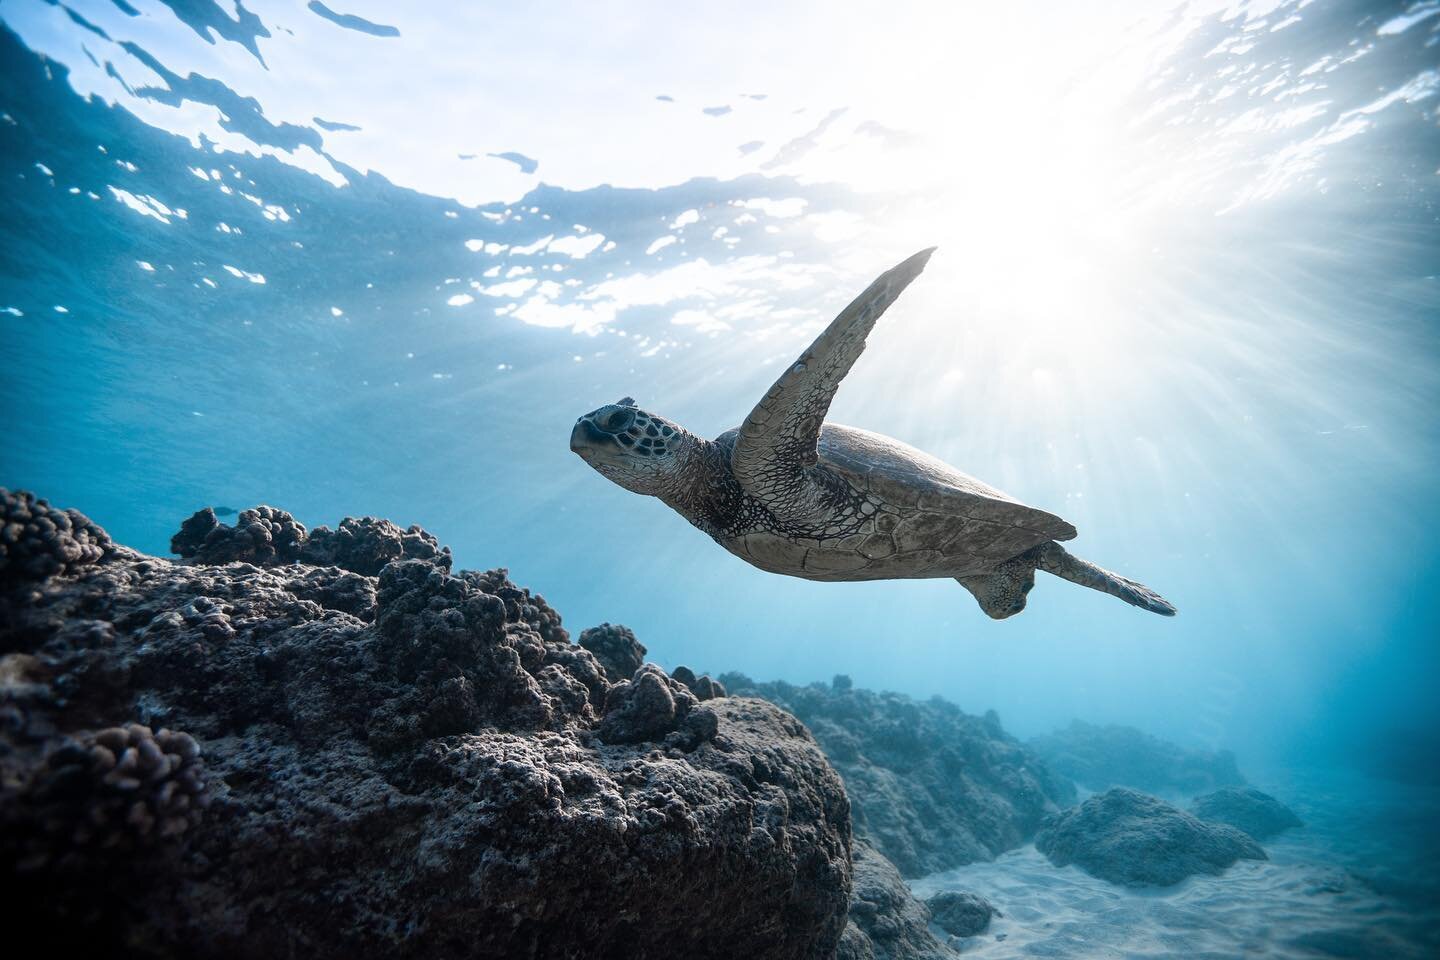 &ldquo;All species of Turtles are protected under the Endangered Species Act, which makes it illegal to harass, harm, pursue, hunt, shoot, wound, capture, or collect sea turtle eggs, hatchlings, adults or any body parts&rdquo; - N.E.S.T. 
Do your par